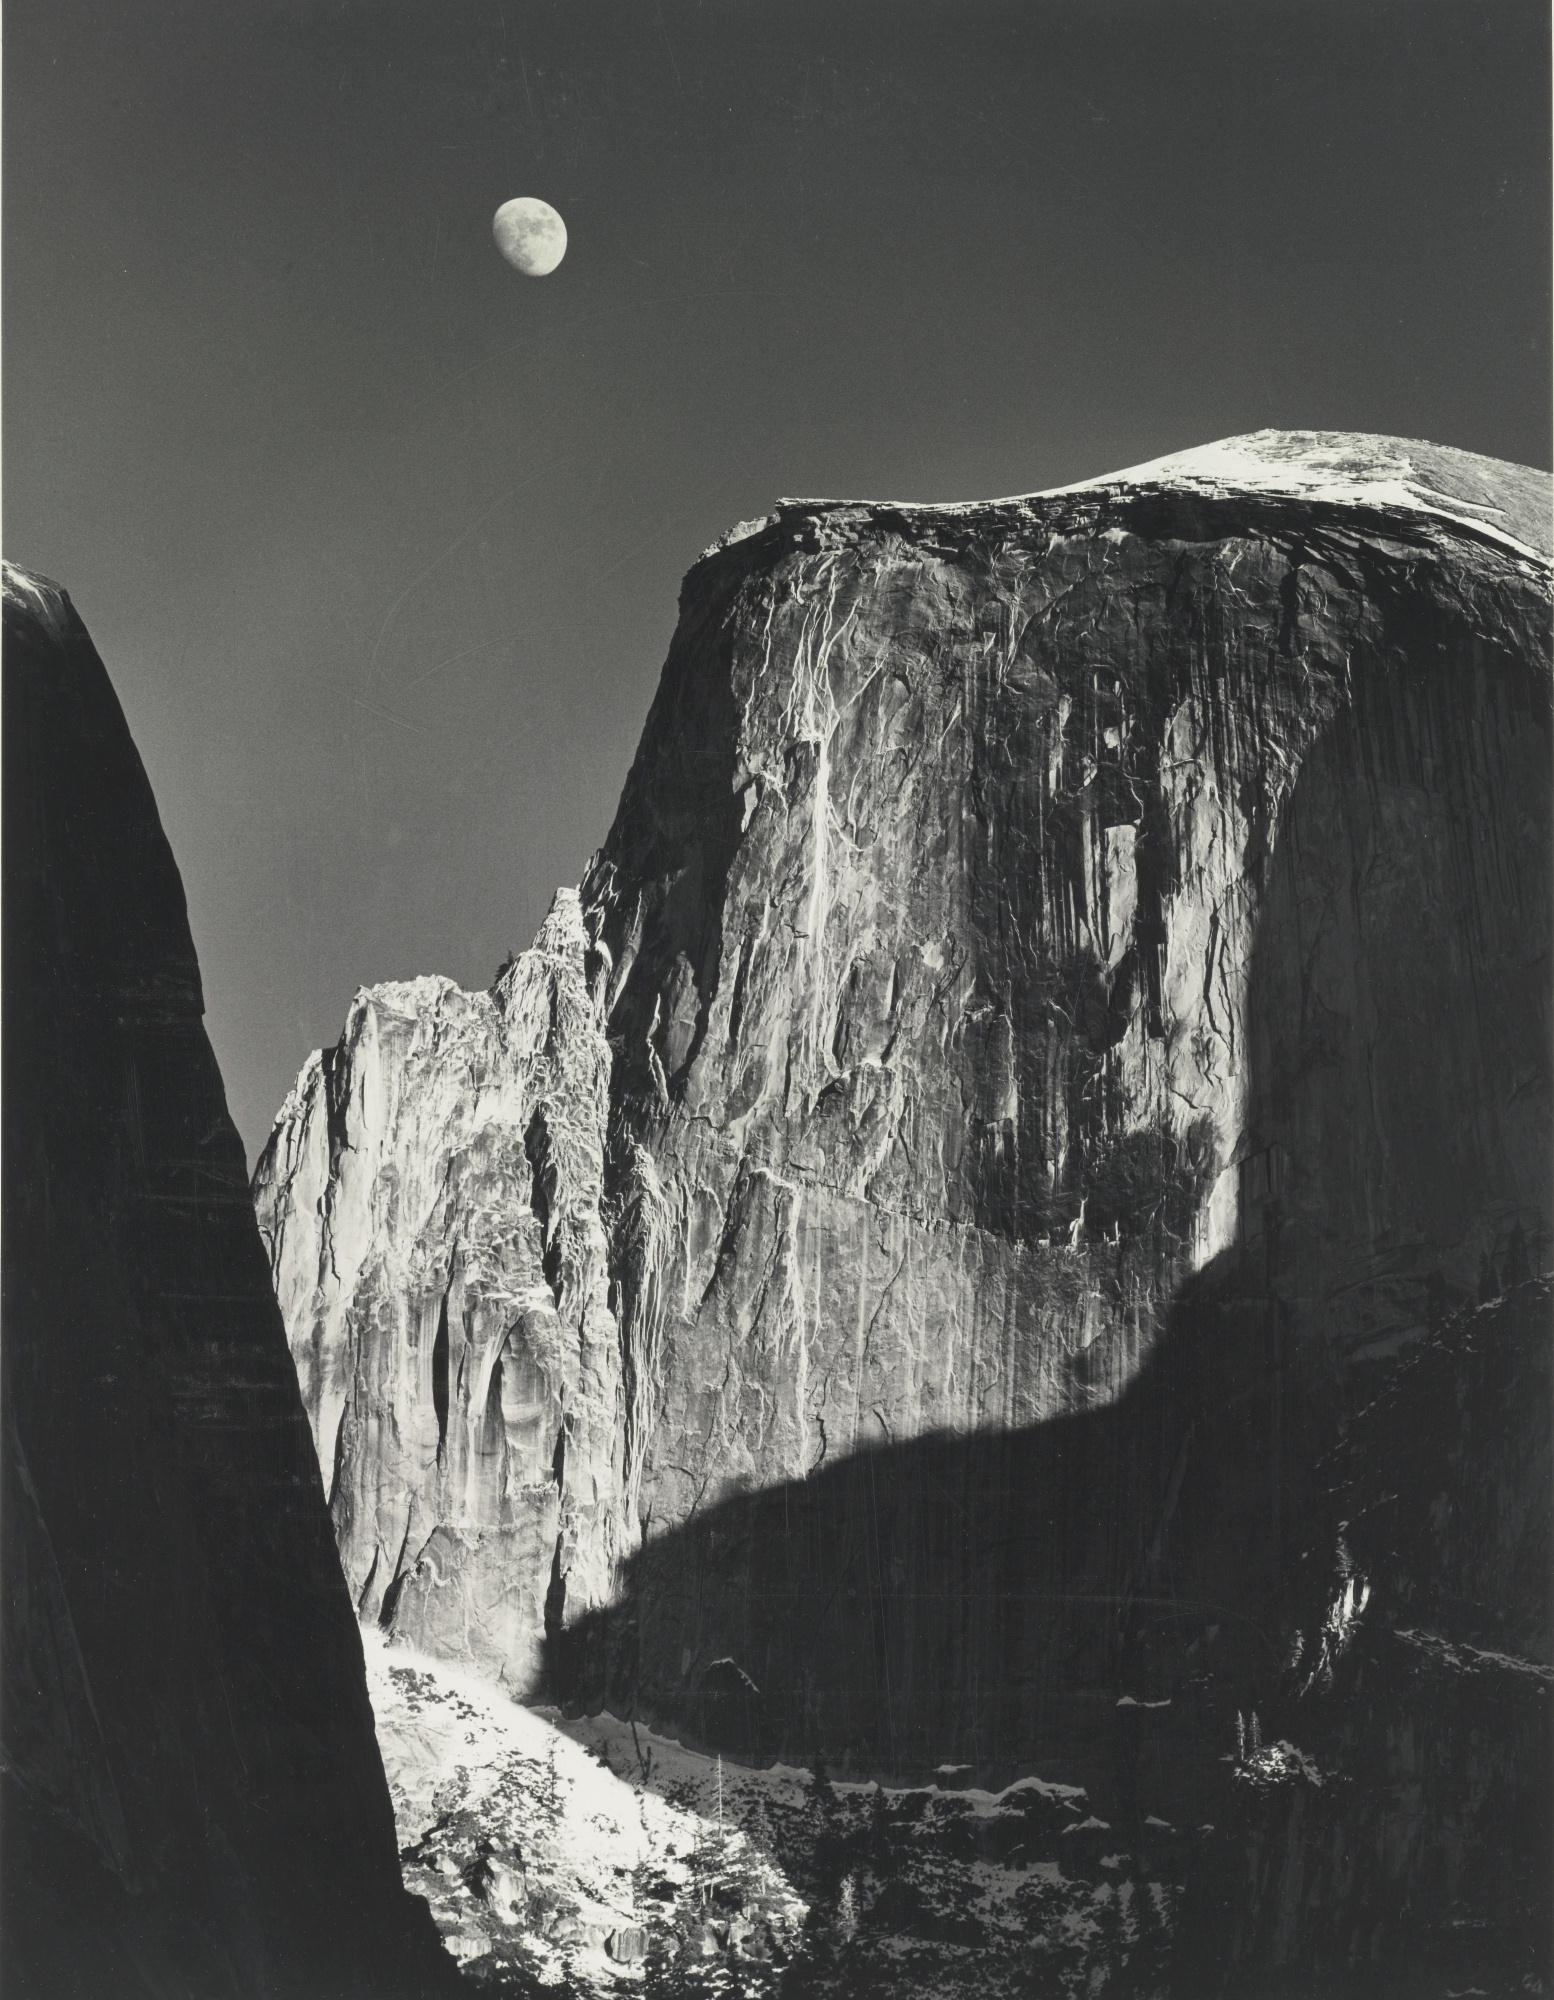 MOON AND HALF DOME, YOSEMITE NATIONAL PARK, CA. by Ansel Adams, 1960